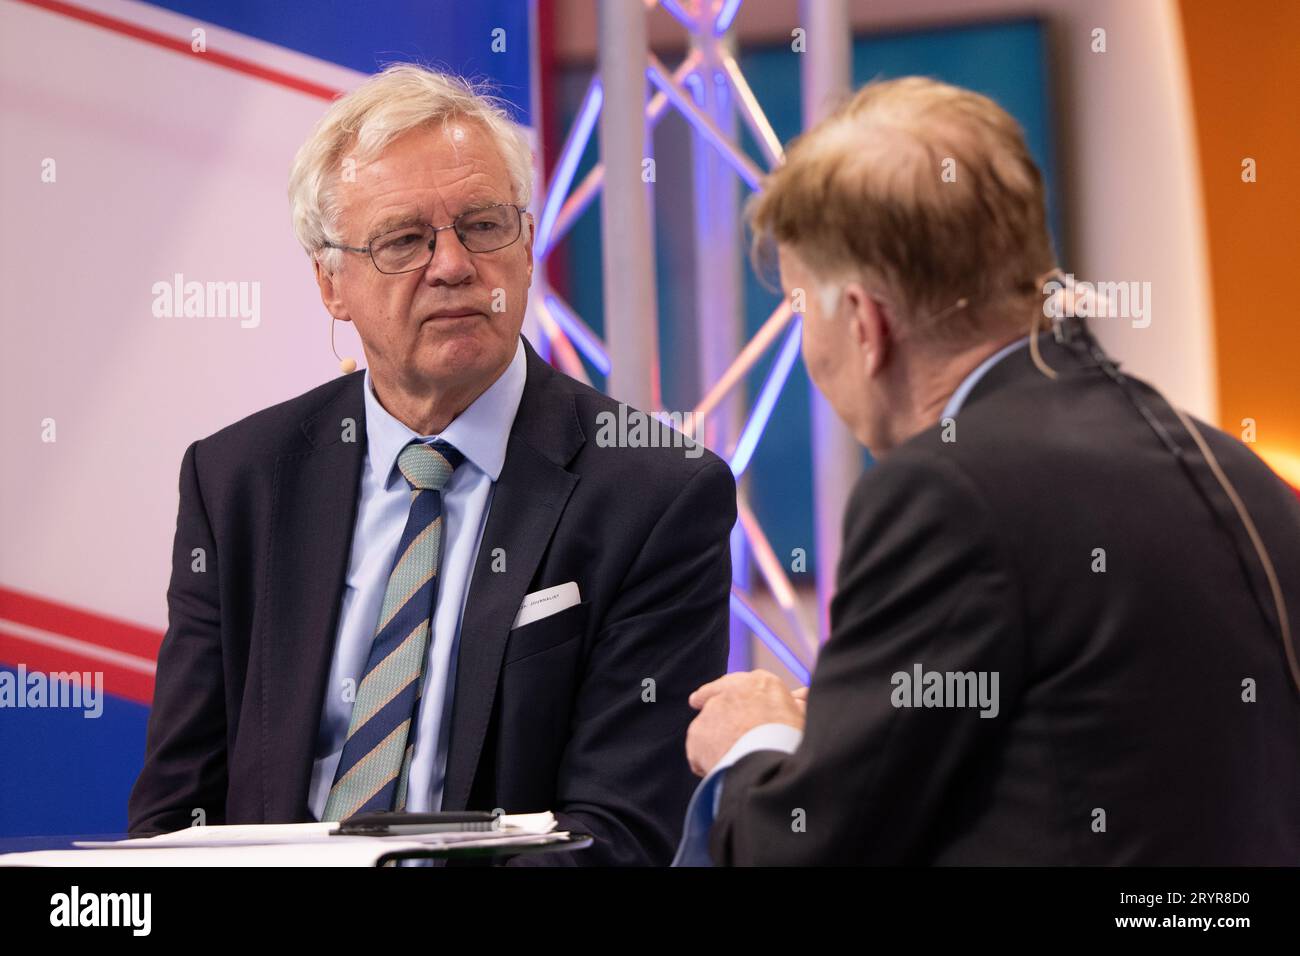 Manchester, UK. 02nd Oct, 2023. 02nd Oct, 2023. David Davis talks to Andrew Pierce on the GB news stand at the 2nd day Conservative conference 2023 Manchester UK Picture: garyroberts/worldwidefeatures.com Credit: GaryRobertsphotography/Alamy Live News Stock Photo